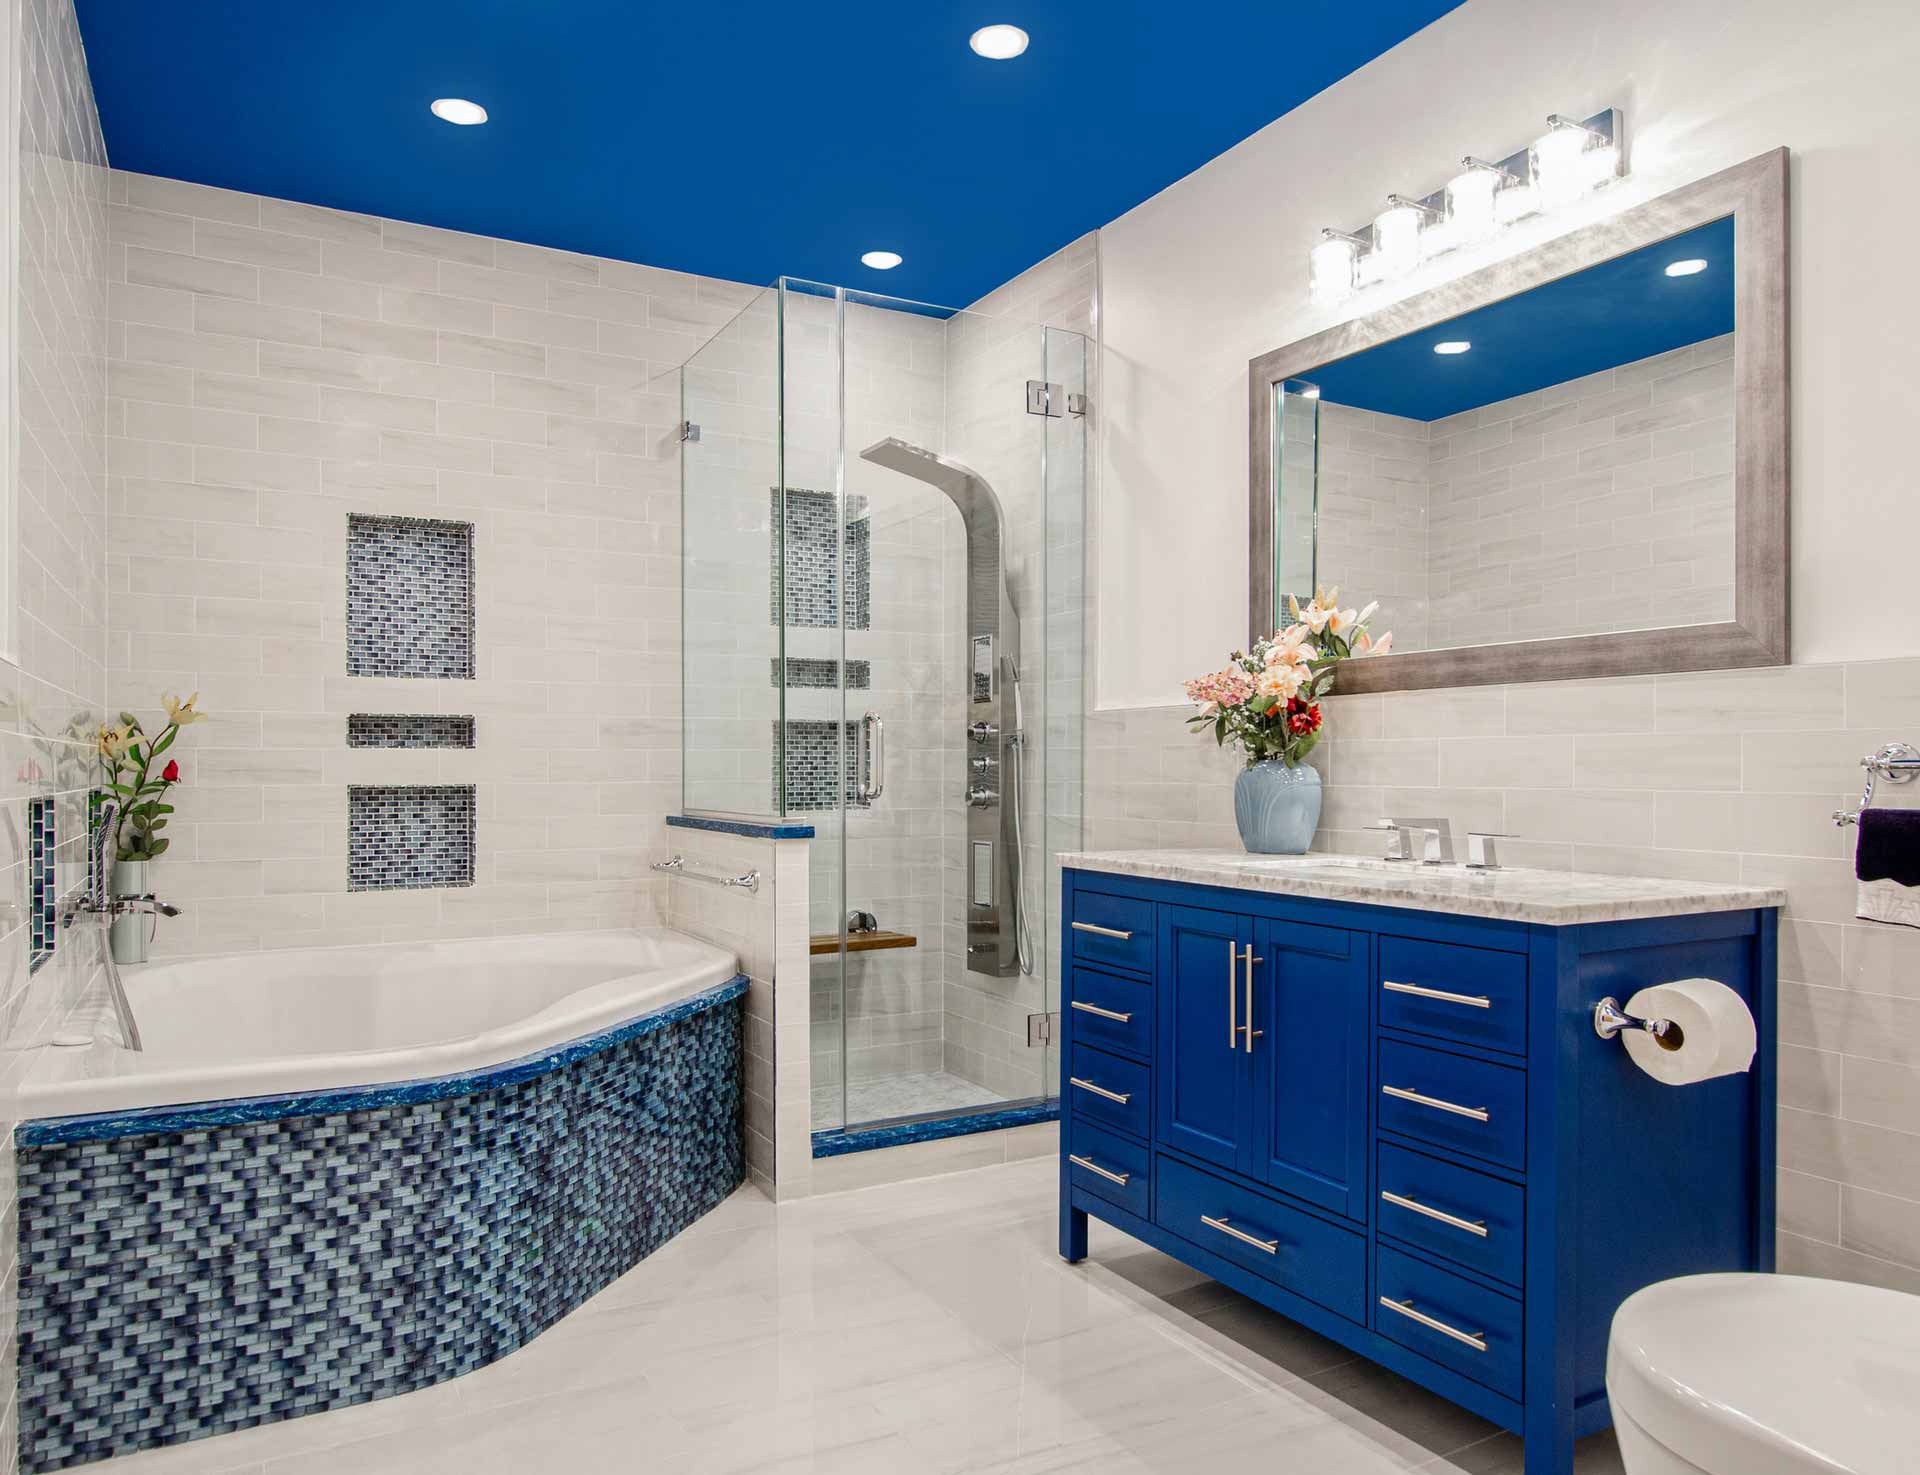 Renovated blue and white bathroom. Blue ceiling. Blue vanity. Blue tile. Jacuzzi tub. White tiles. Stand up shower.